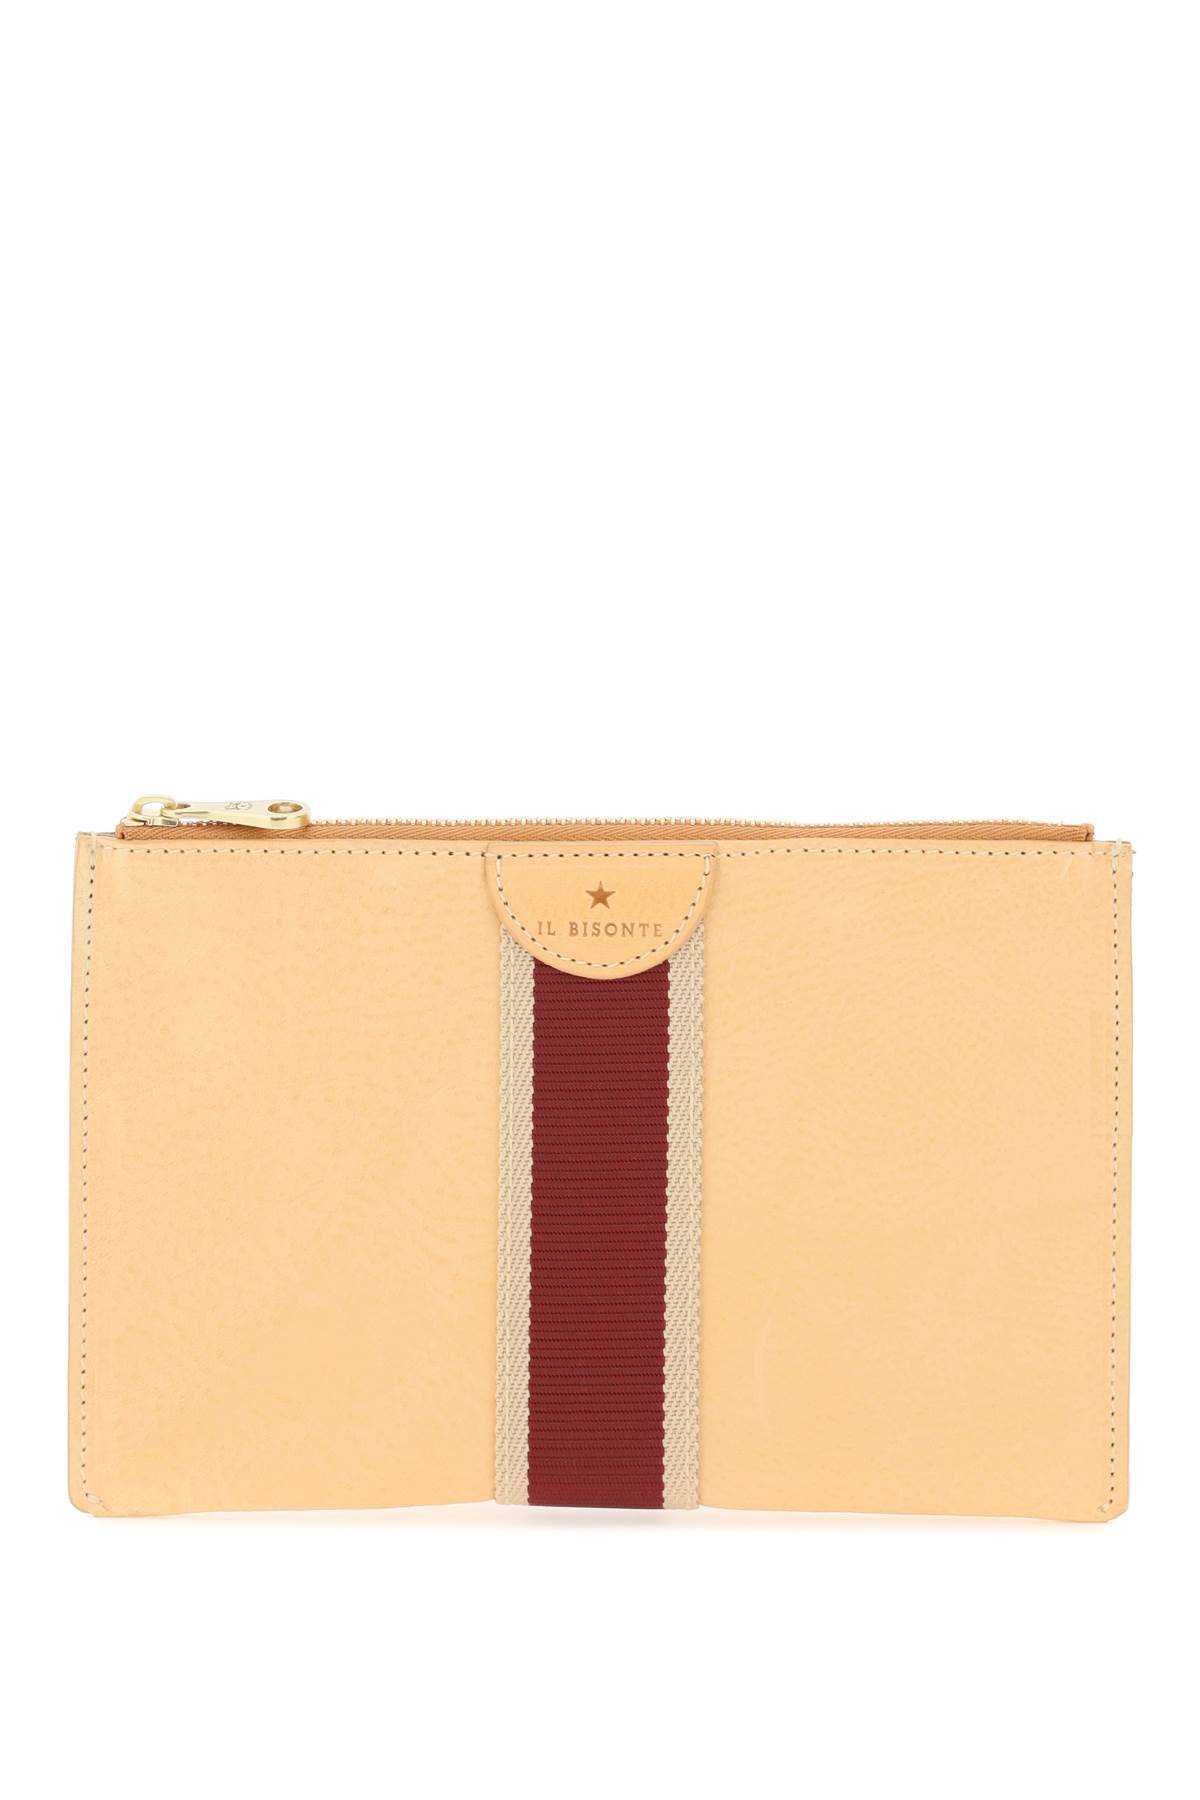 Il Bisonte Leather Pouch With Ribbon In Beige